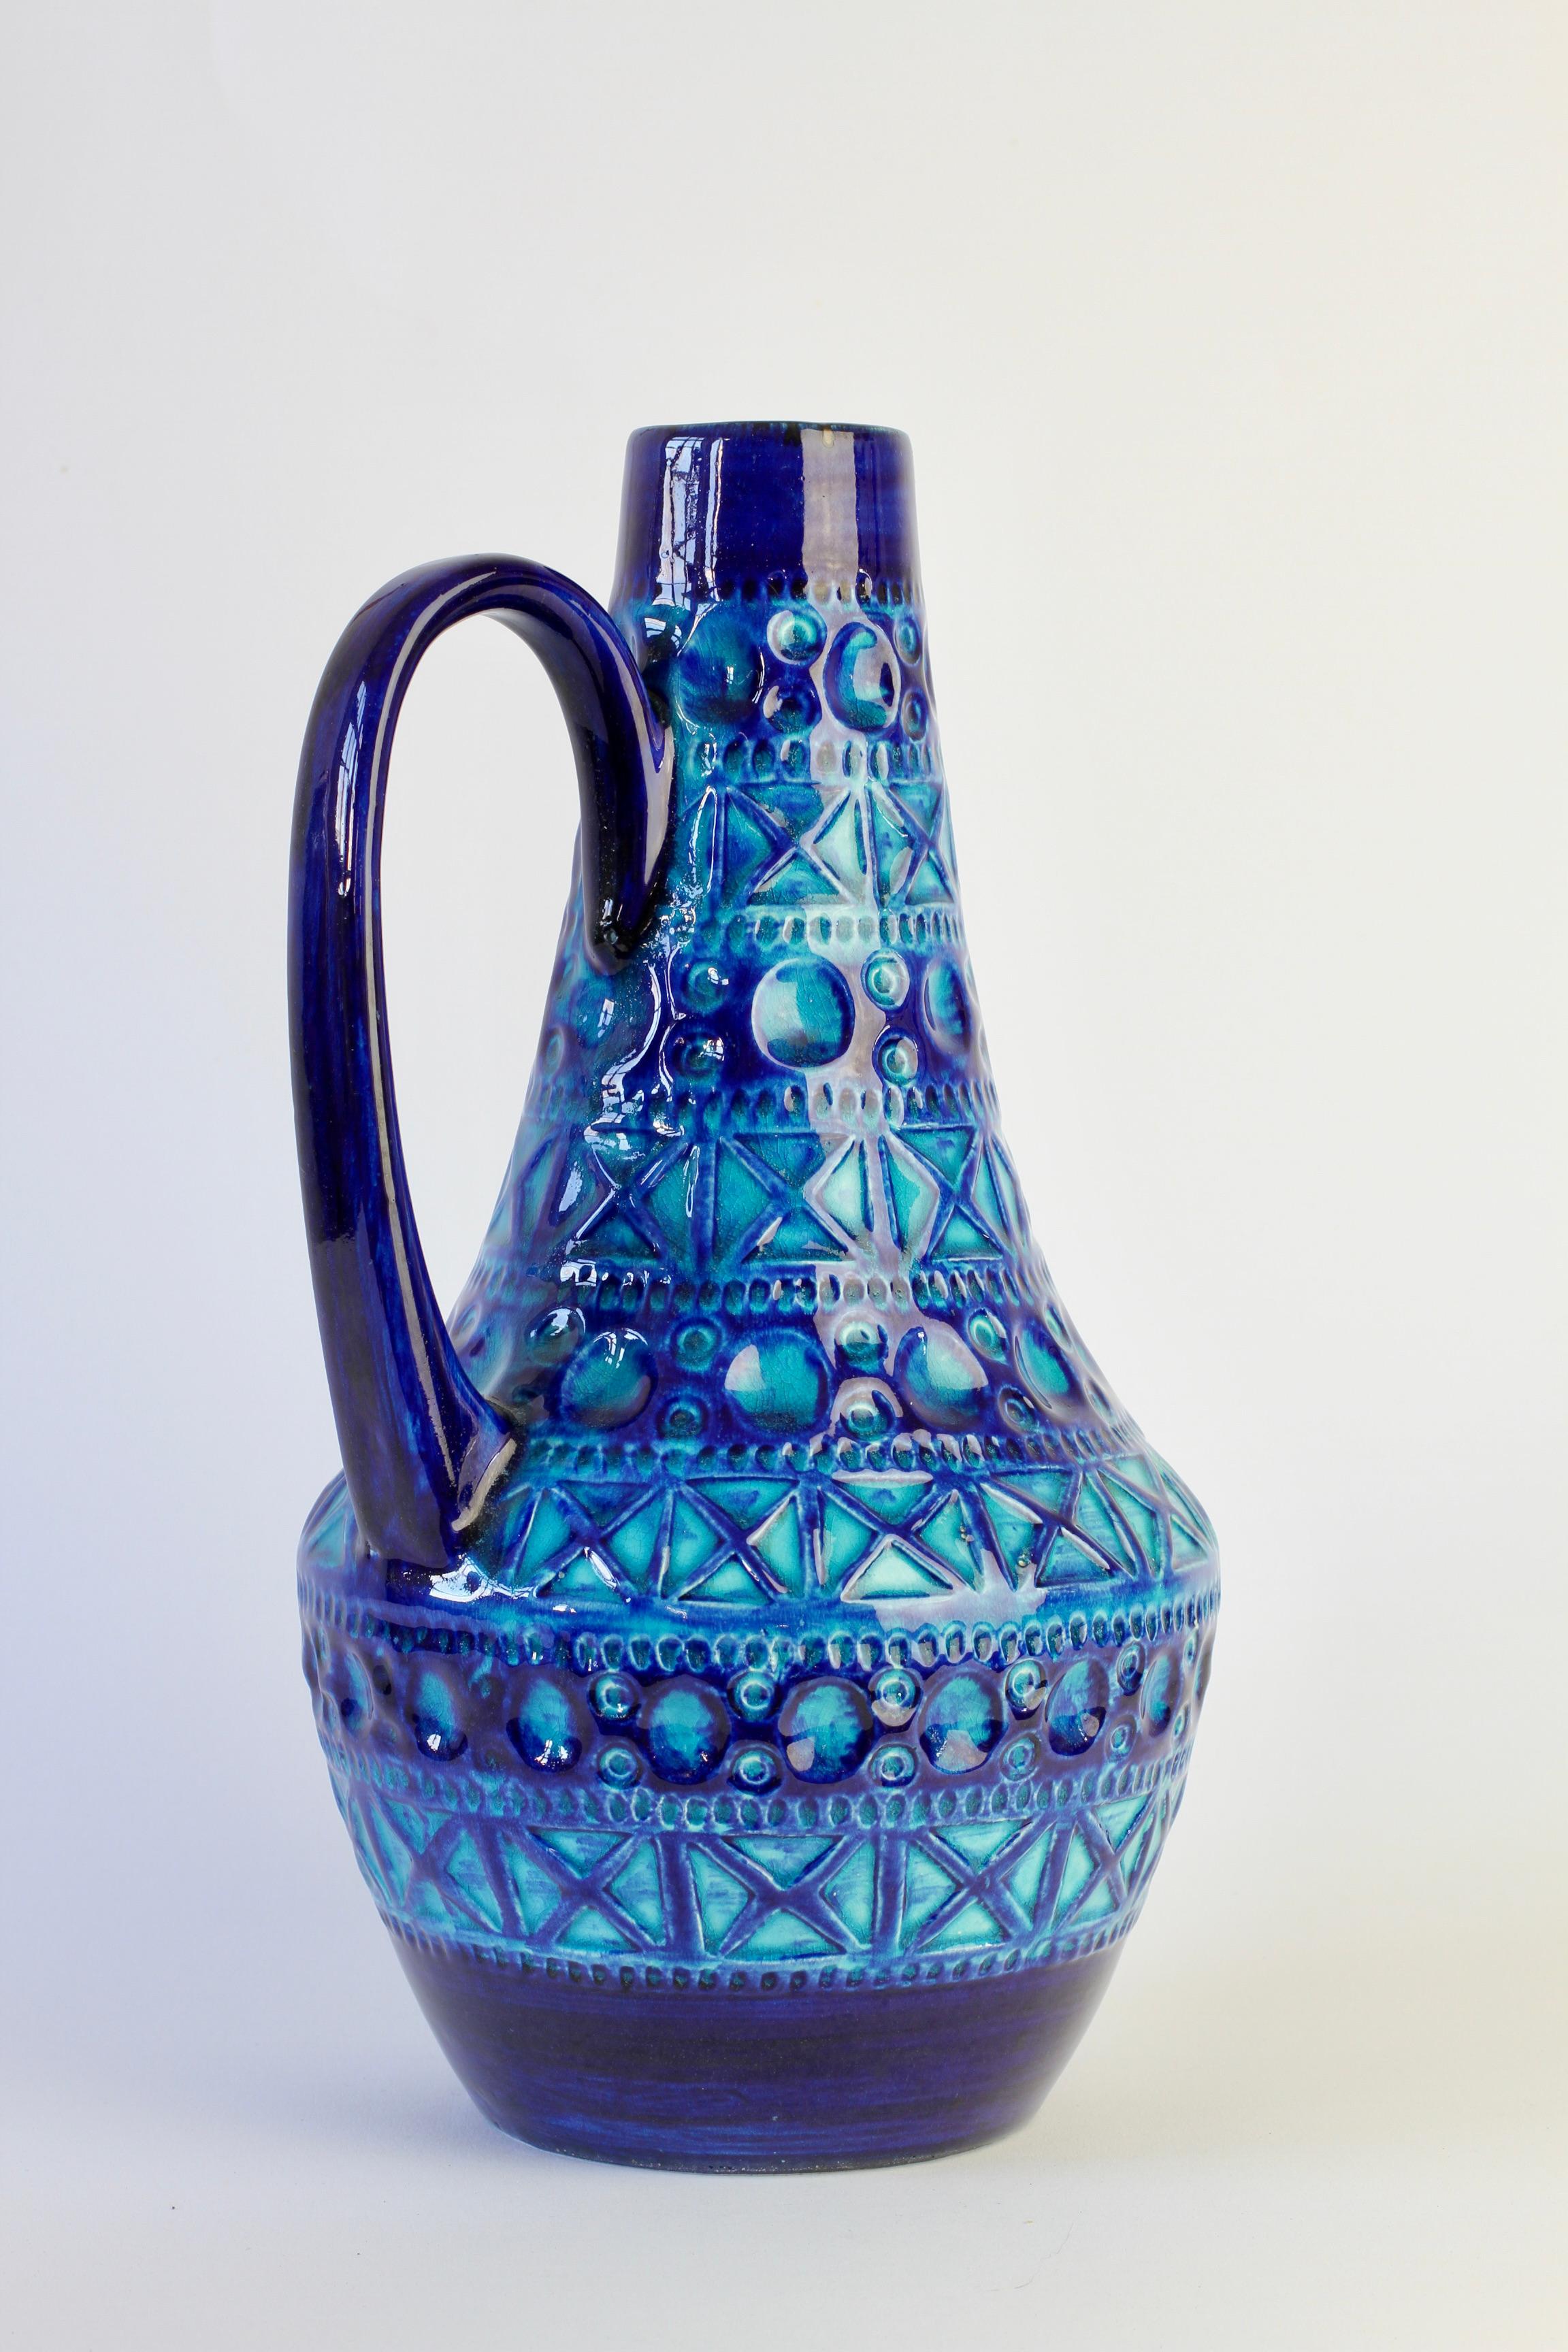 Glazed Vintage West German Bitossi Style Vase by Bodo Mans for Bay Pottery, circa 1970 For Sale